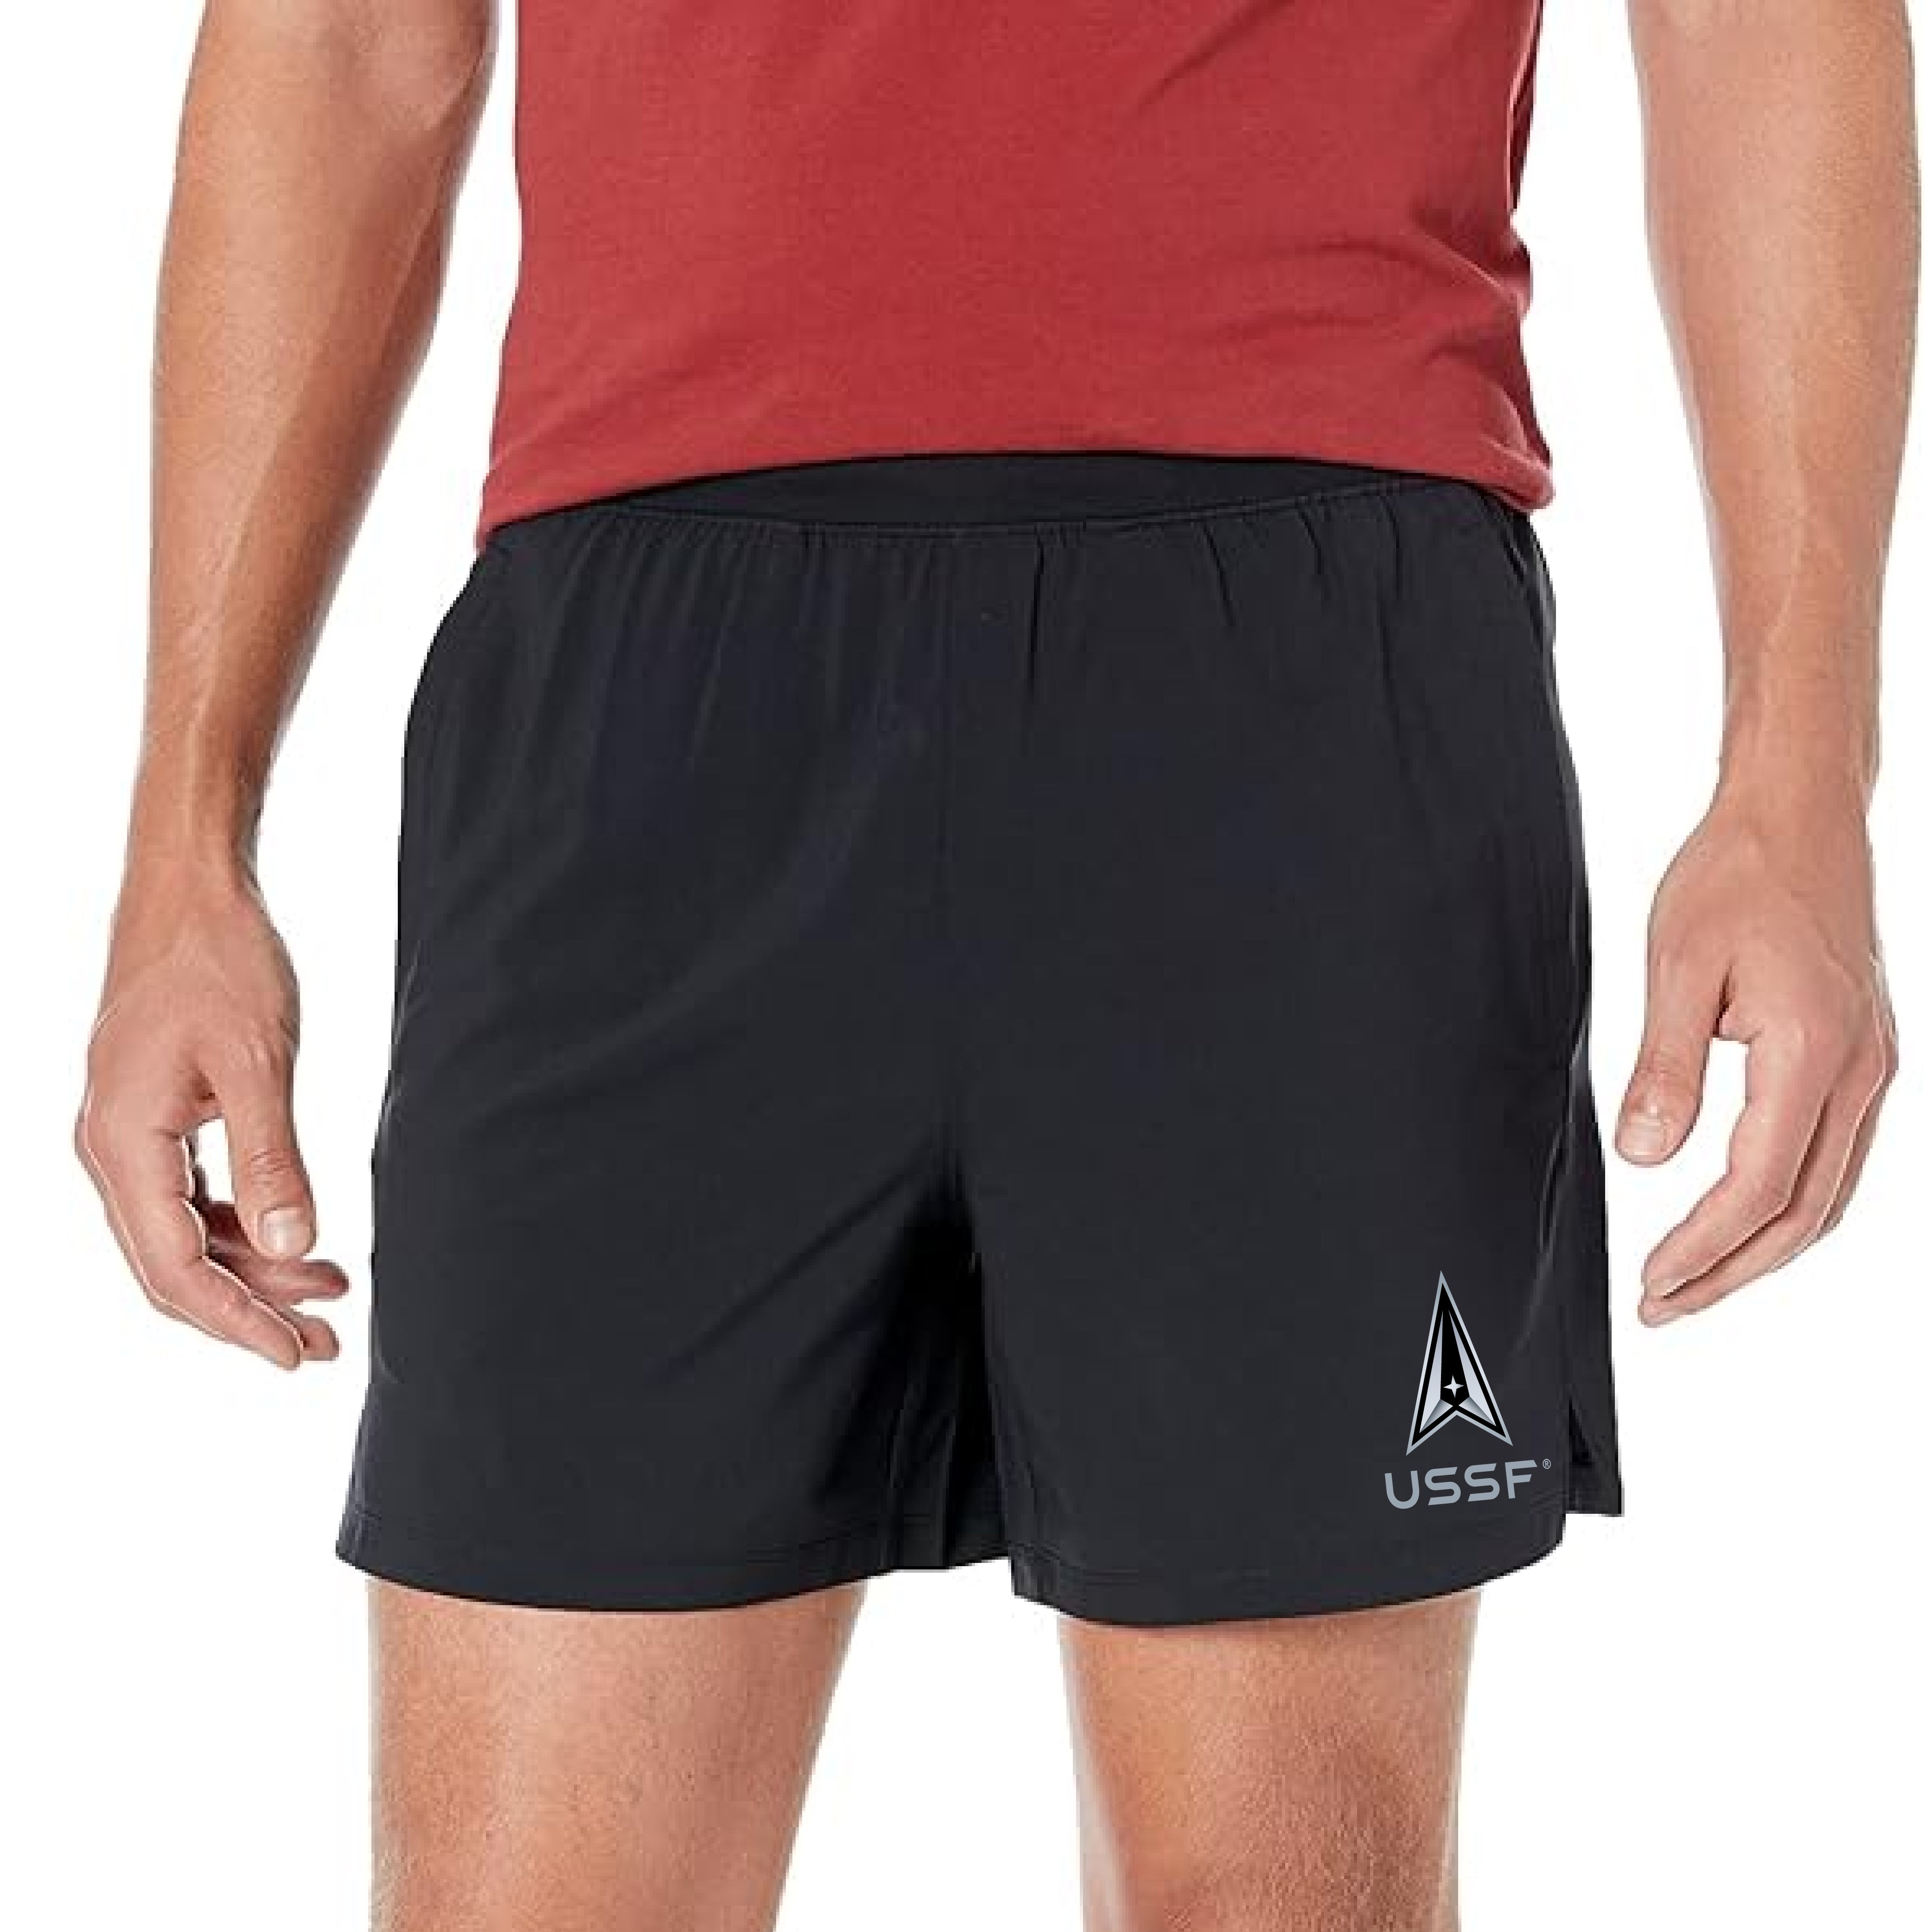 Space Force Delta Men's Under Armour Tactical Academy 5" Shorts